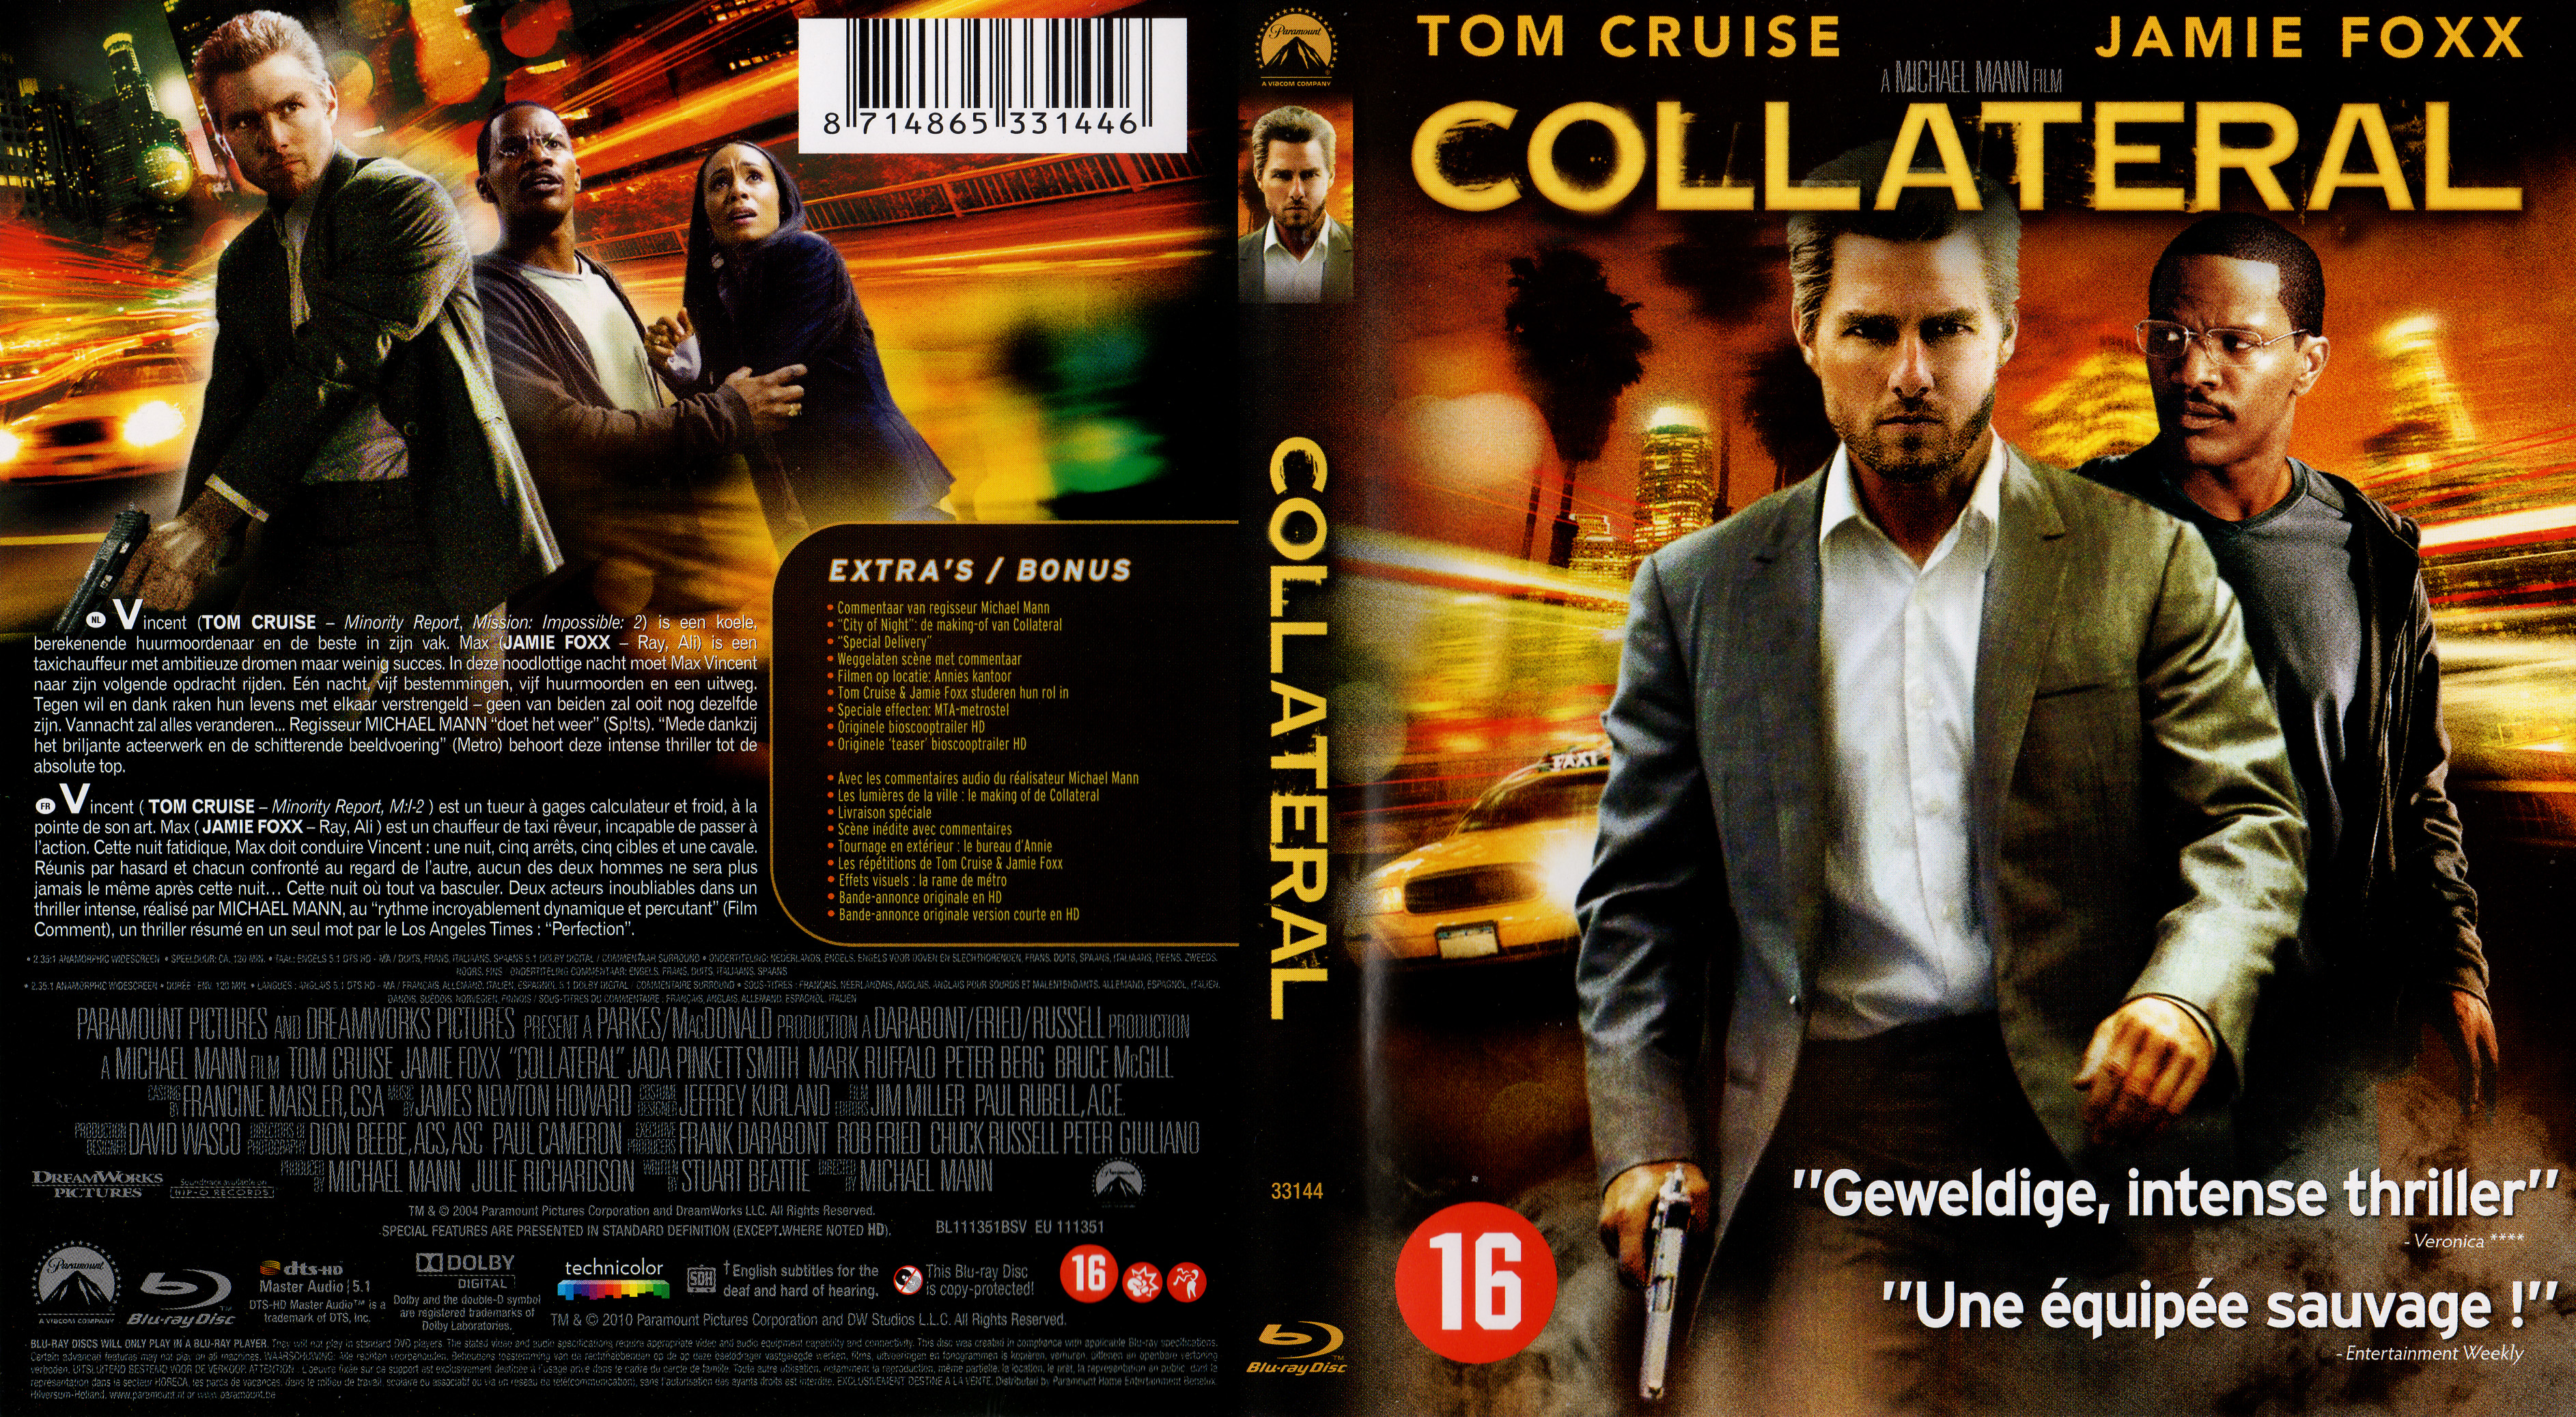 Jaquette DVD Collateral (BLU-RAY) v2